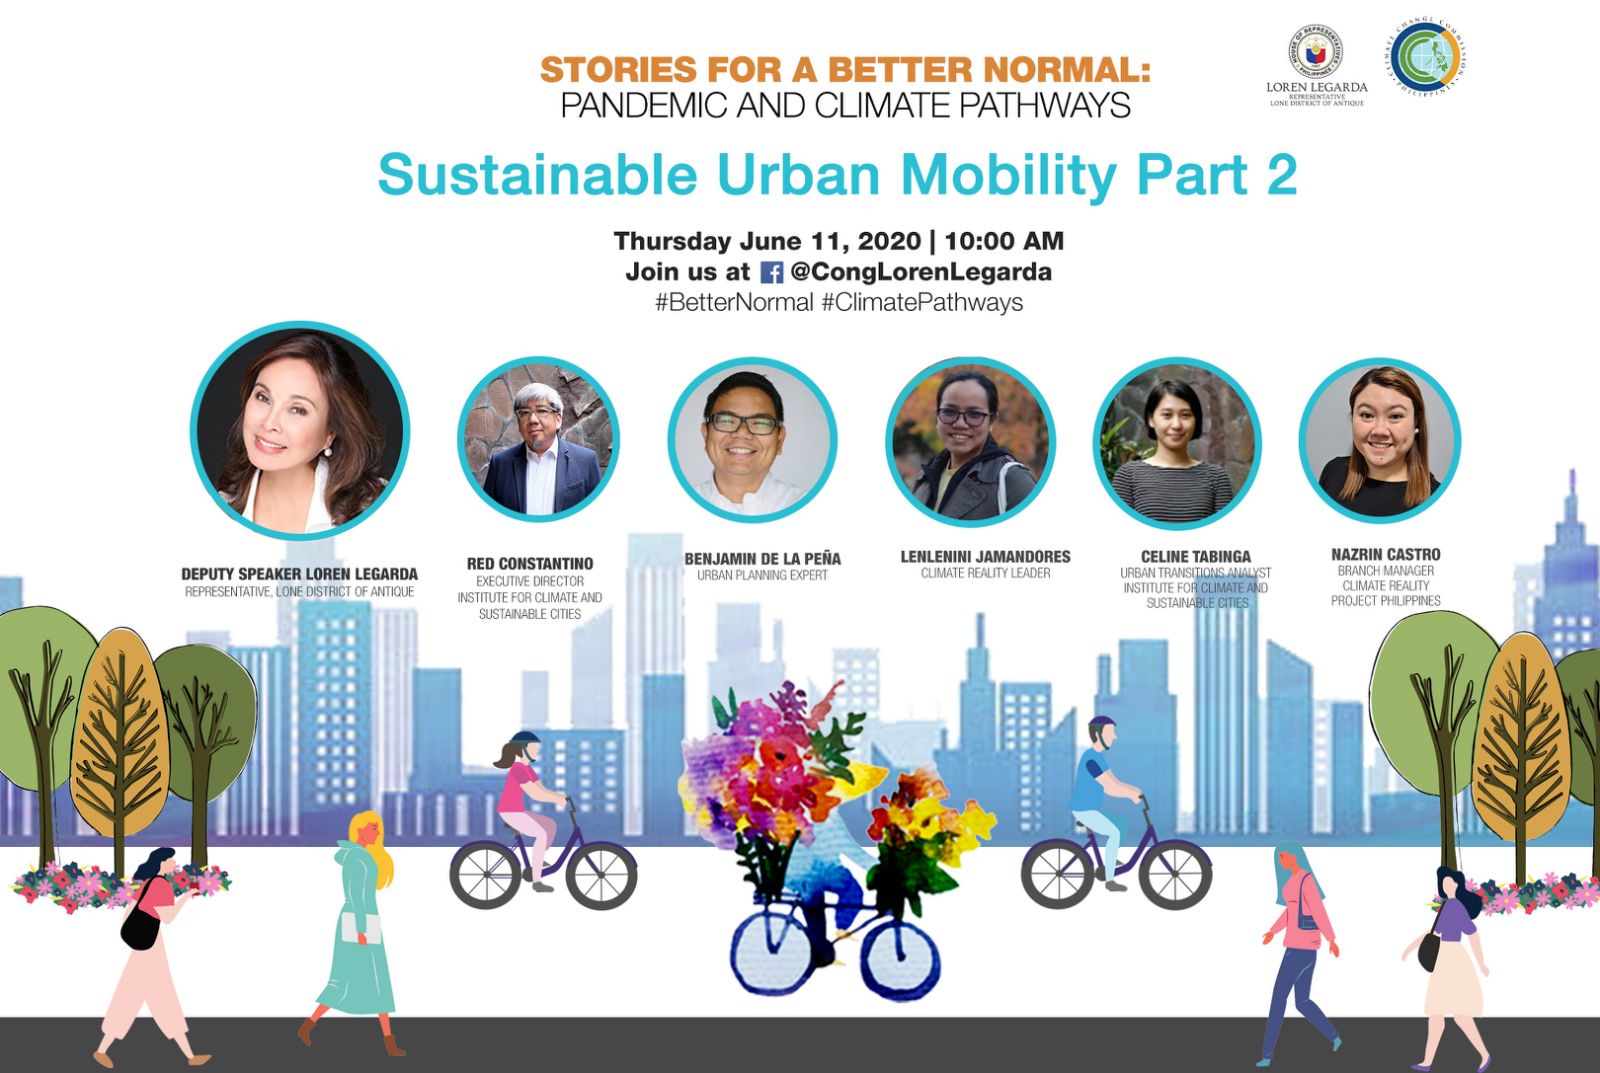 Part 2 of Sustainable Urban Mobility in 4th Episode of “Stories for a Better Normal” Series